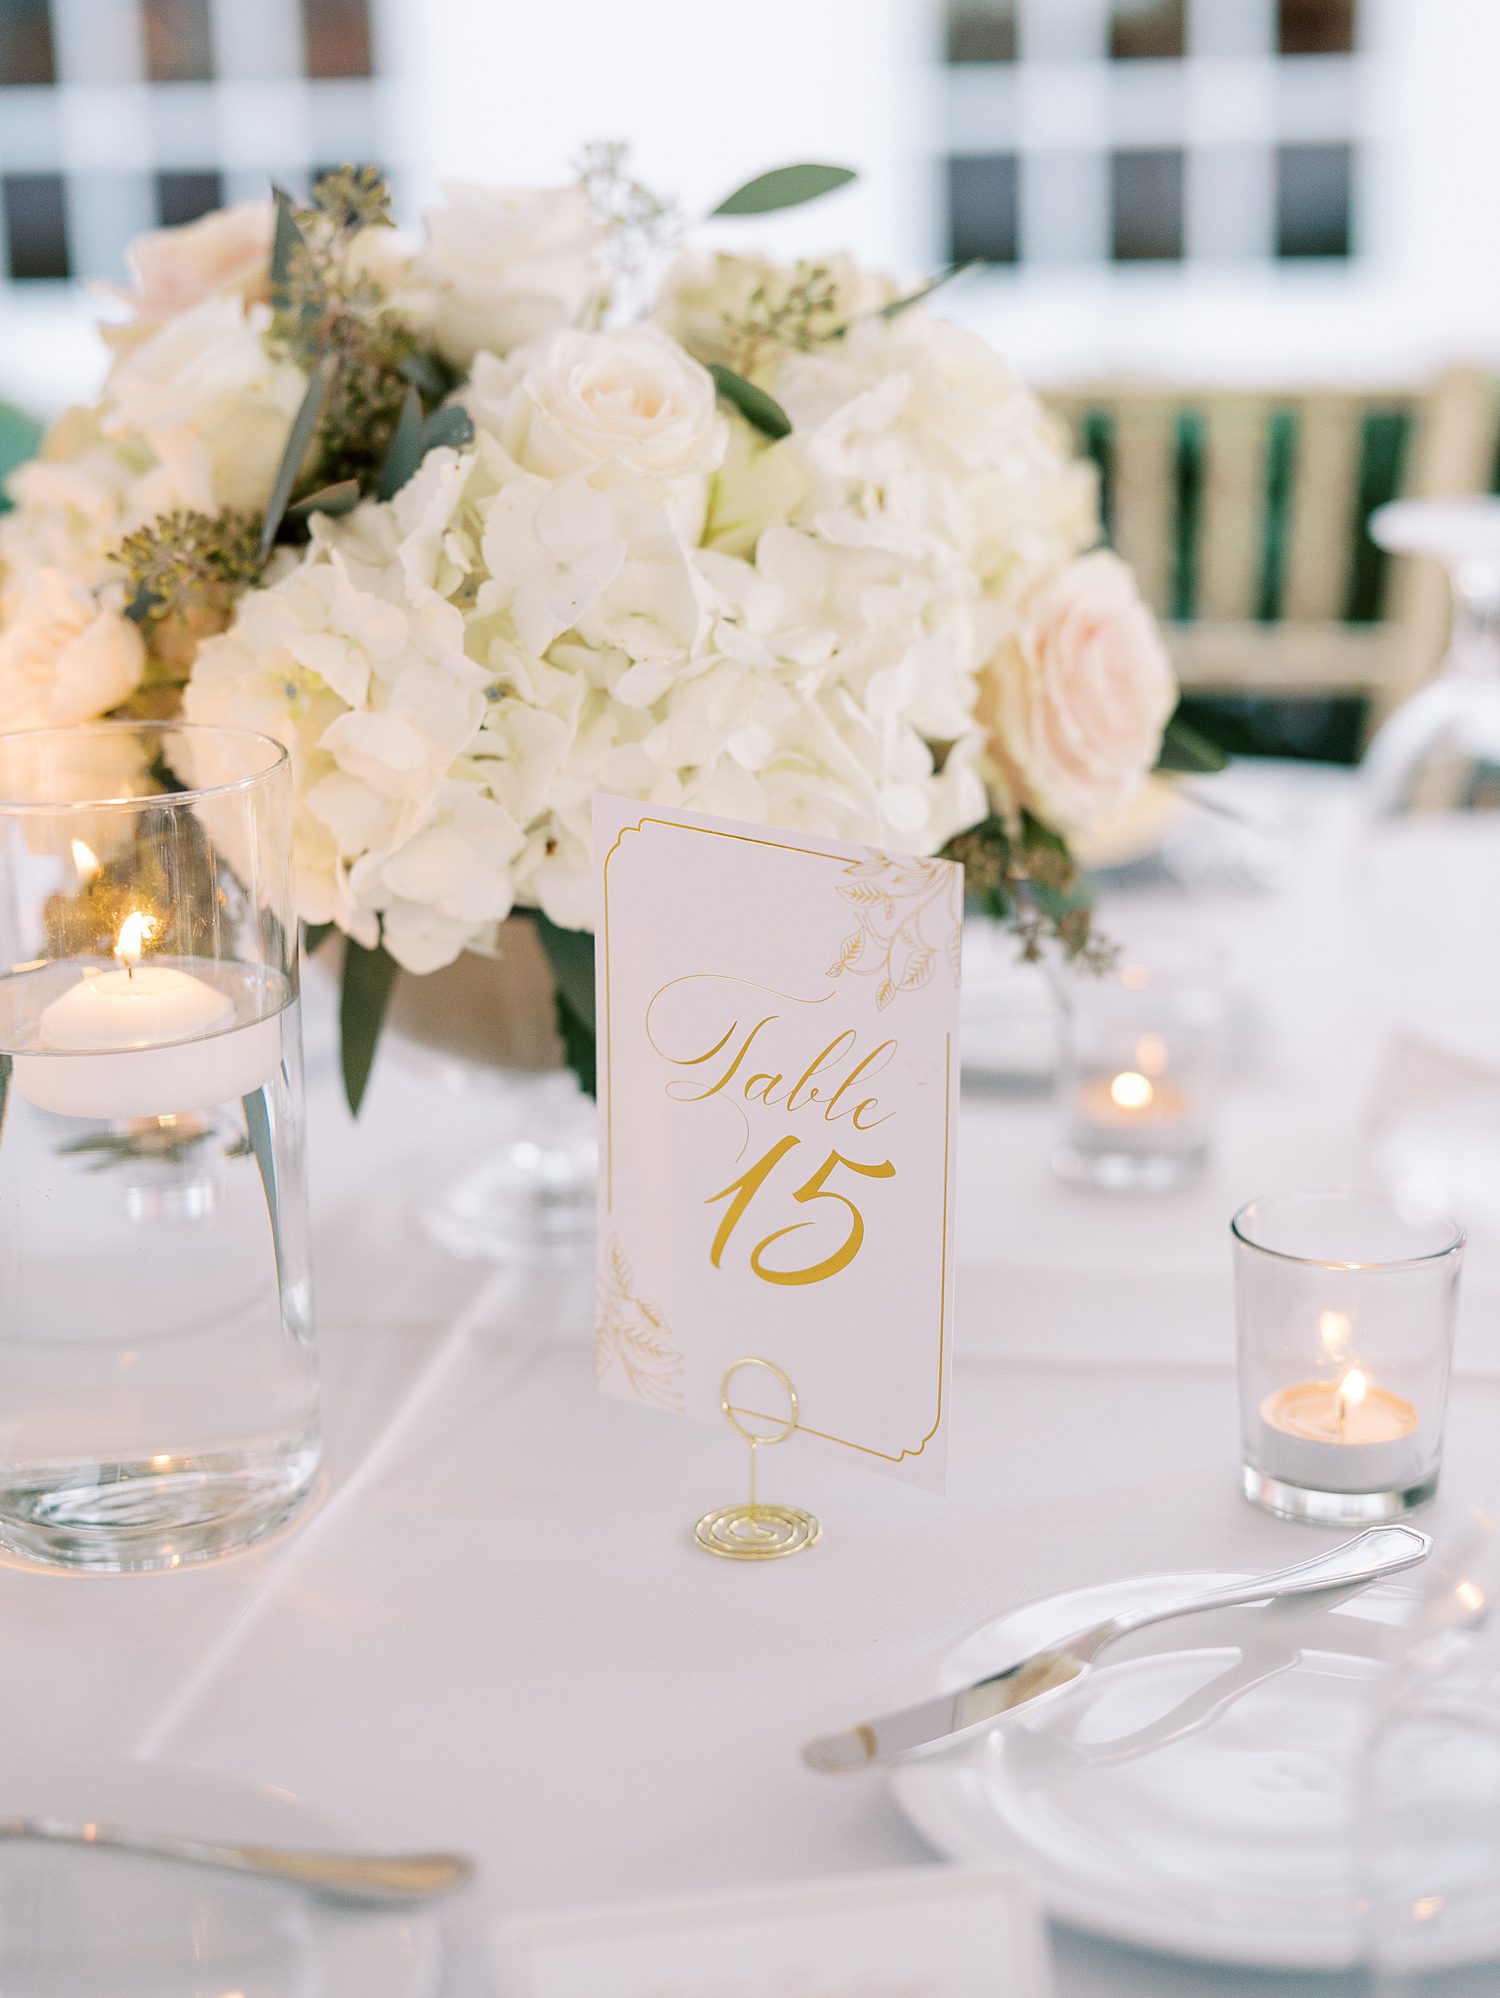 Tampa Yacht Club wedding reception with blush and ivory flowers